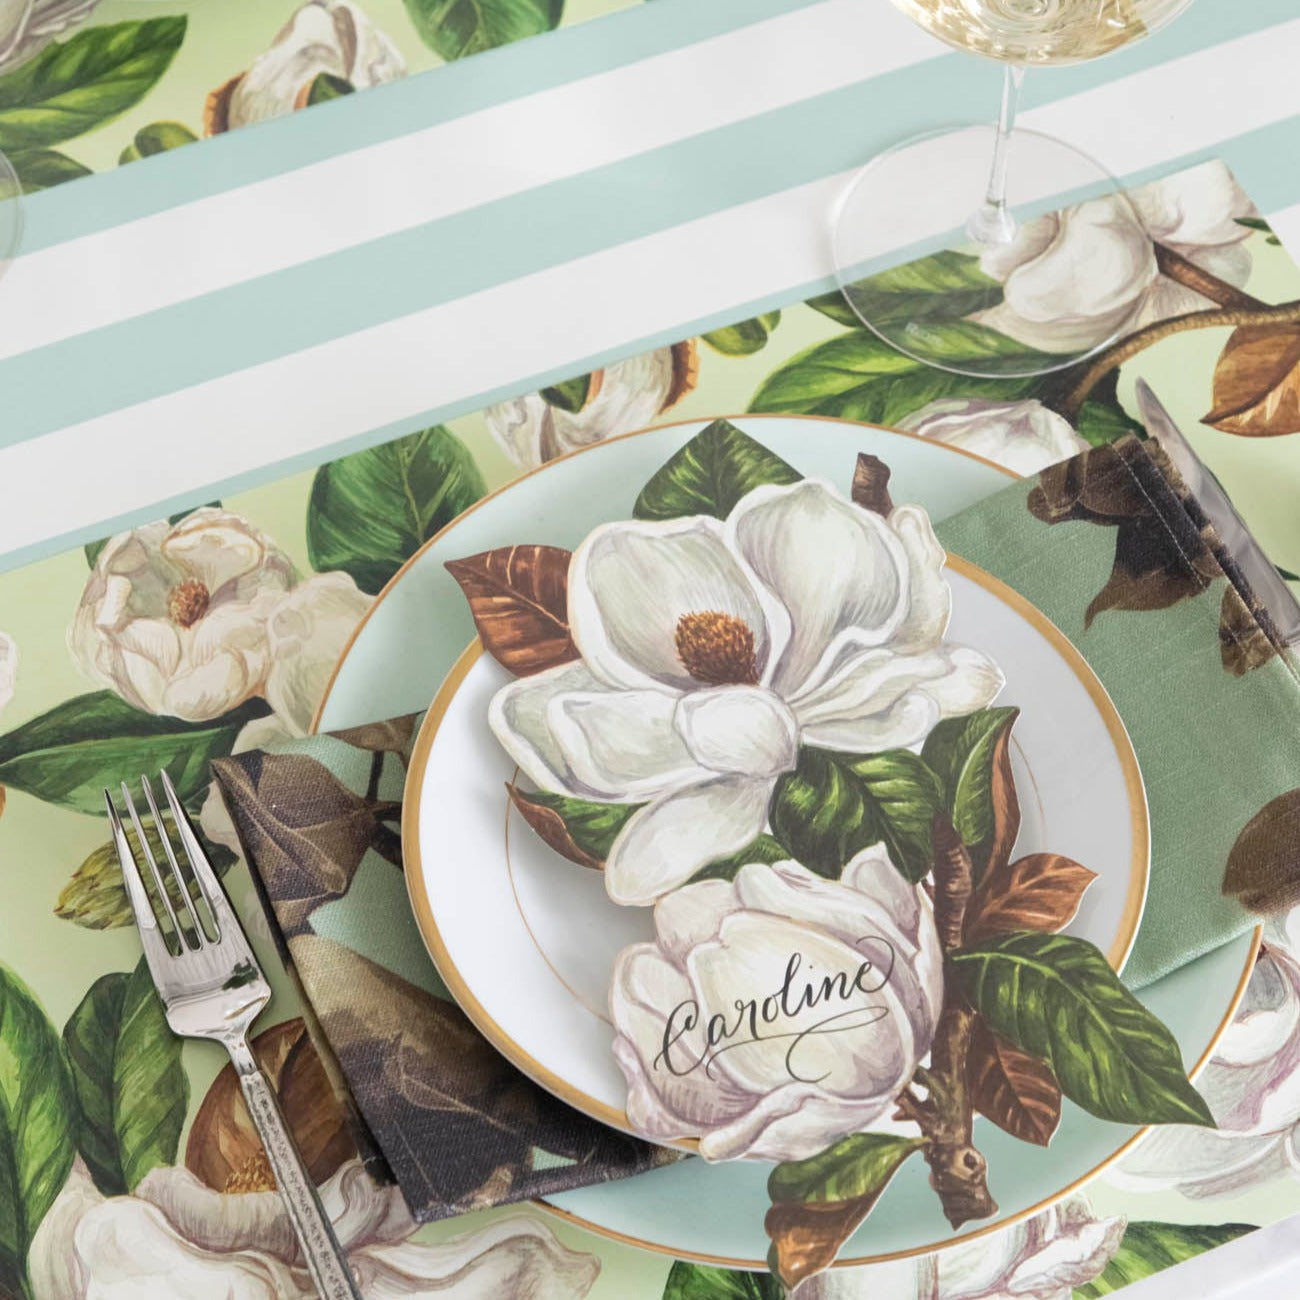 These Mint Magnolia Blooms Placemats from Hester &amp; Cook feature beautiful magnolias and are the perfect addition to any table setting.